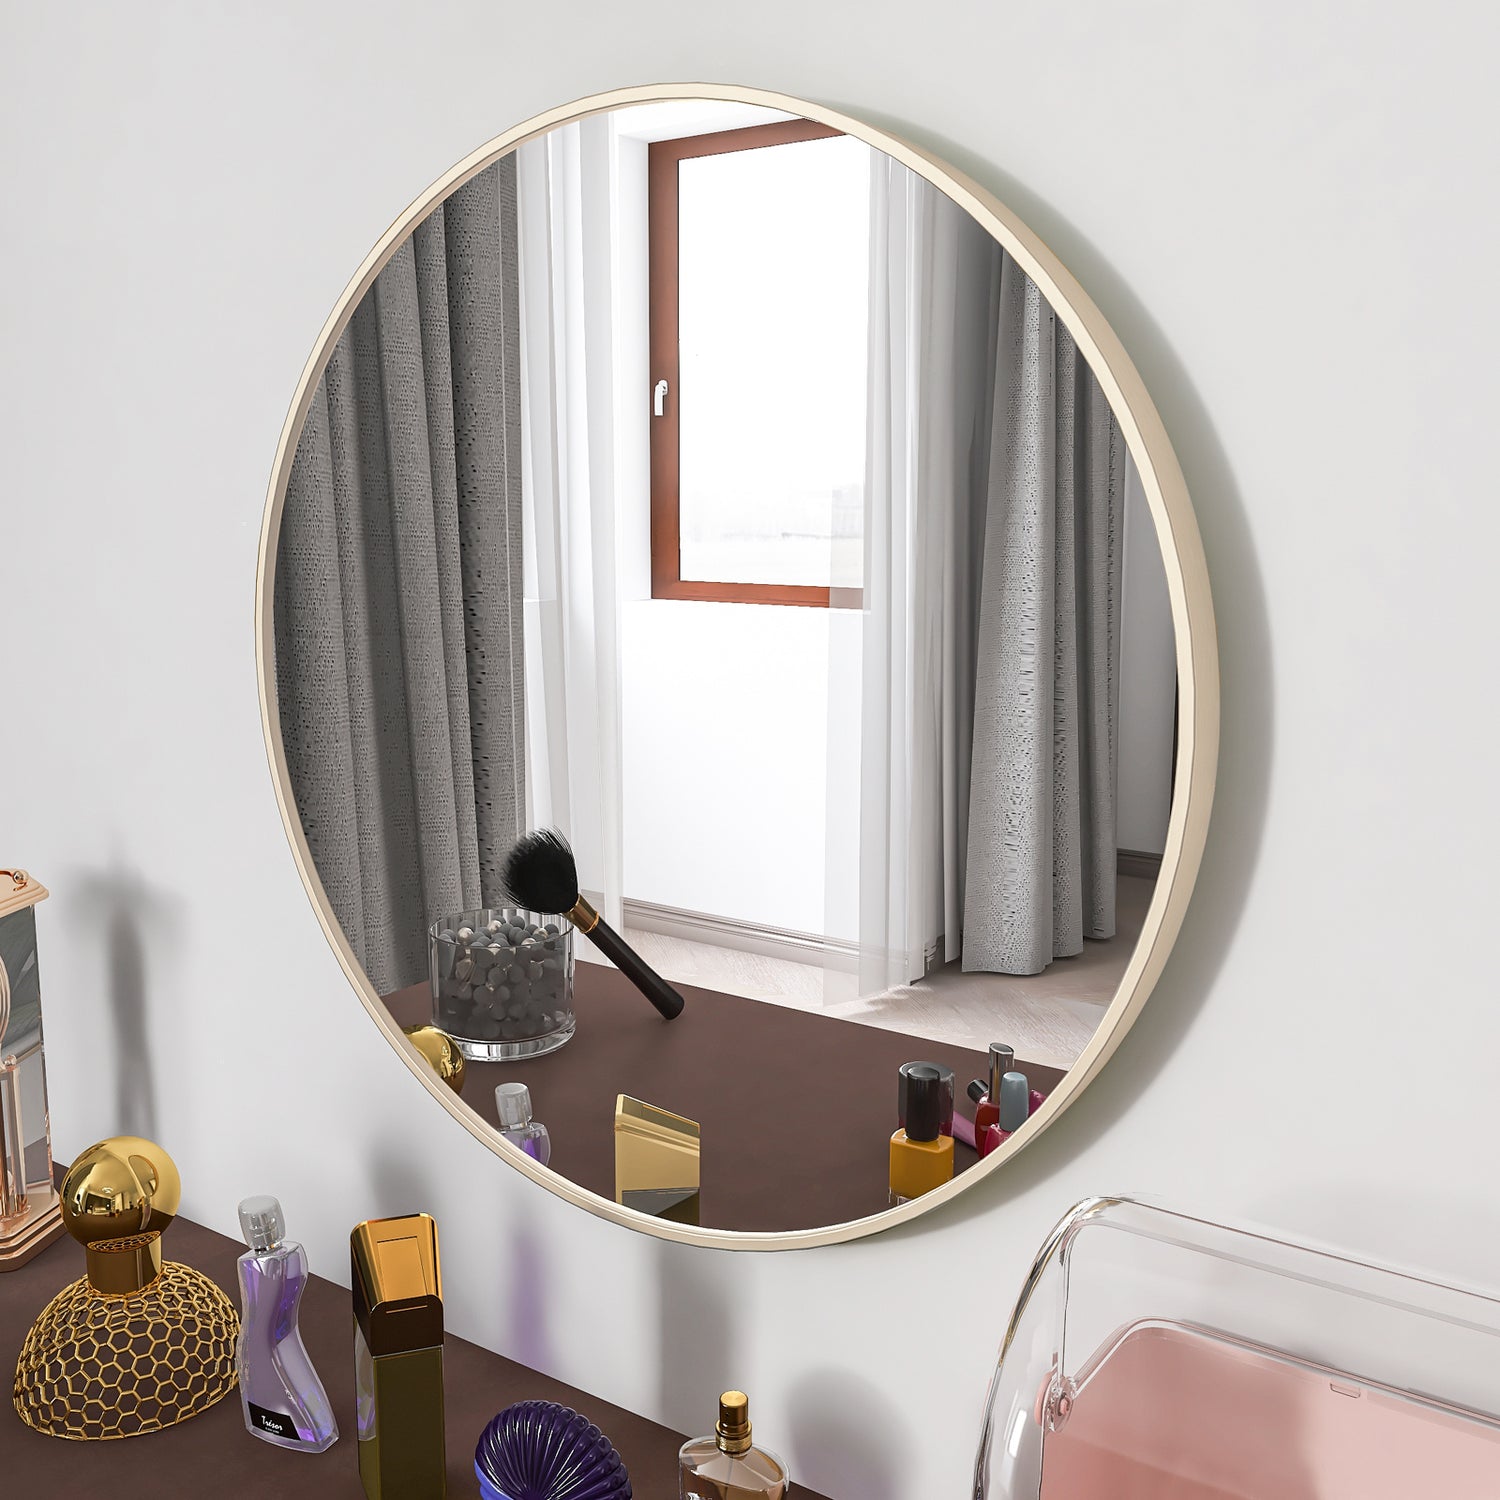 Matte Gold Wall Mirror 24 inches; Round Mirror Metal Framed Mirror Circle Wall Mounted Mirror, Circular Mirror for Bathroom Wall Decor Living Room